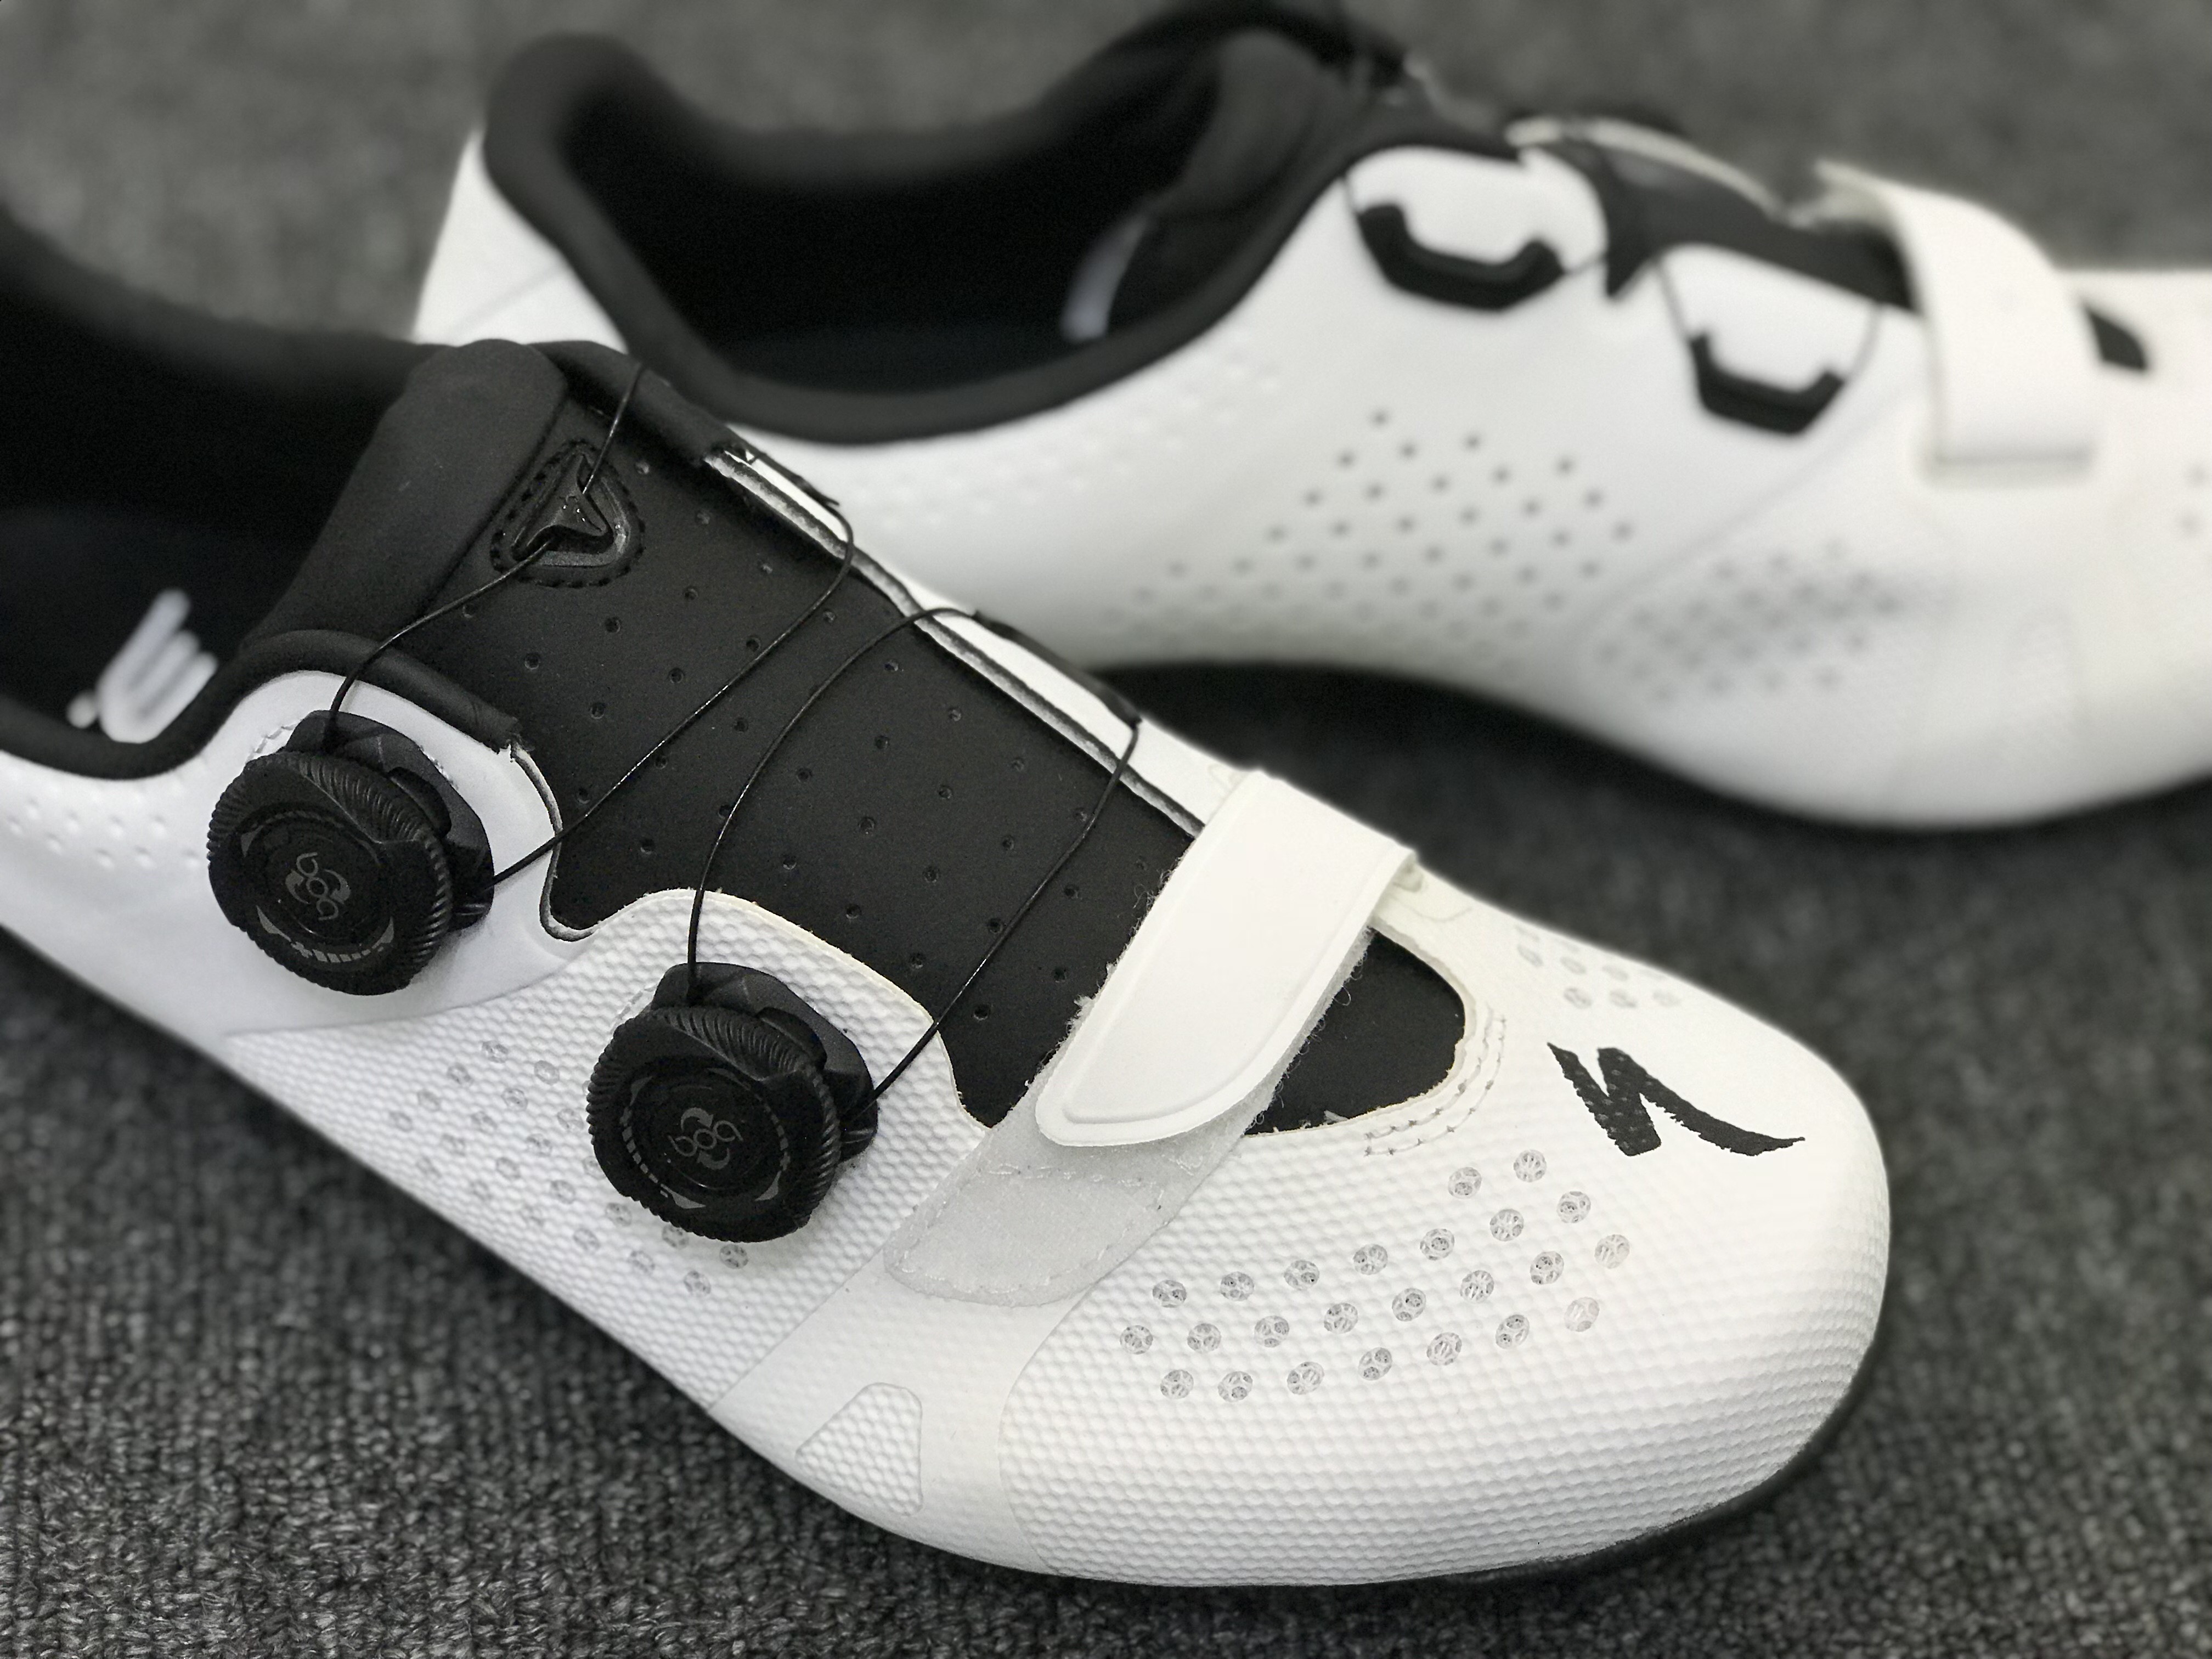 SPECIALIZED TORCH 3.0 ROAD SHOE 